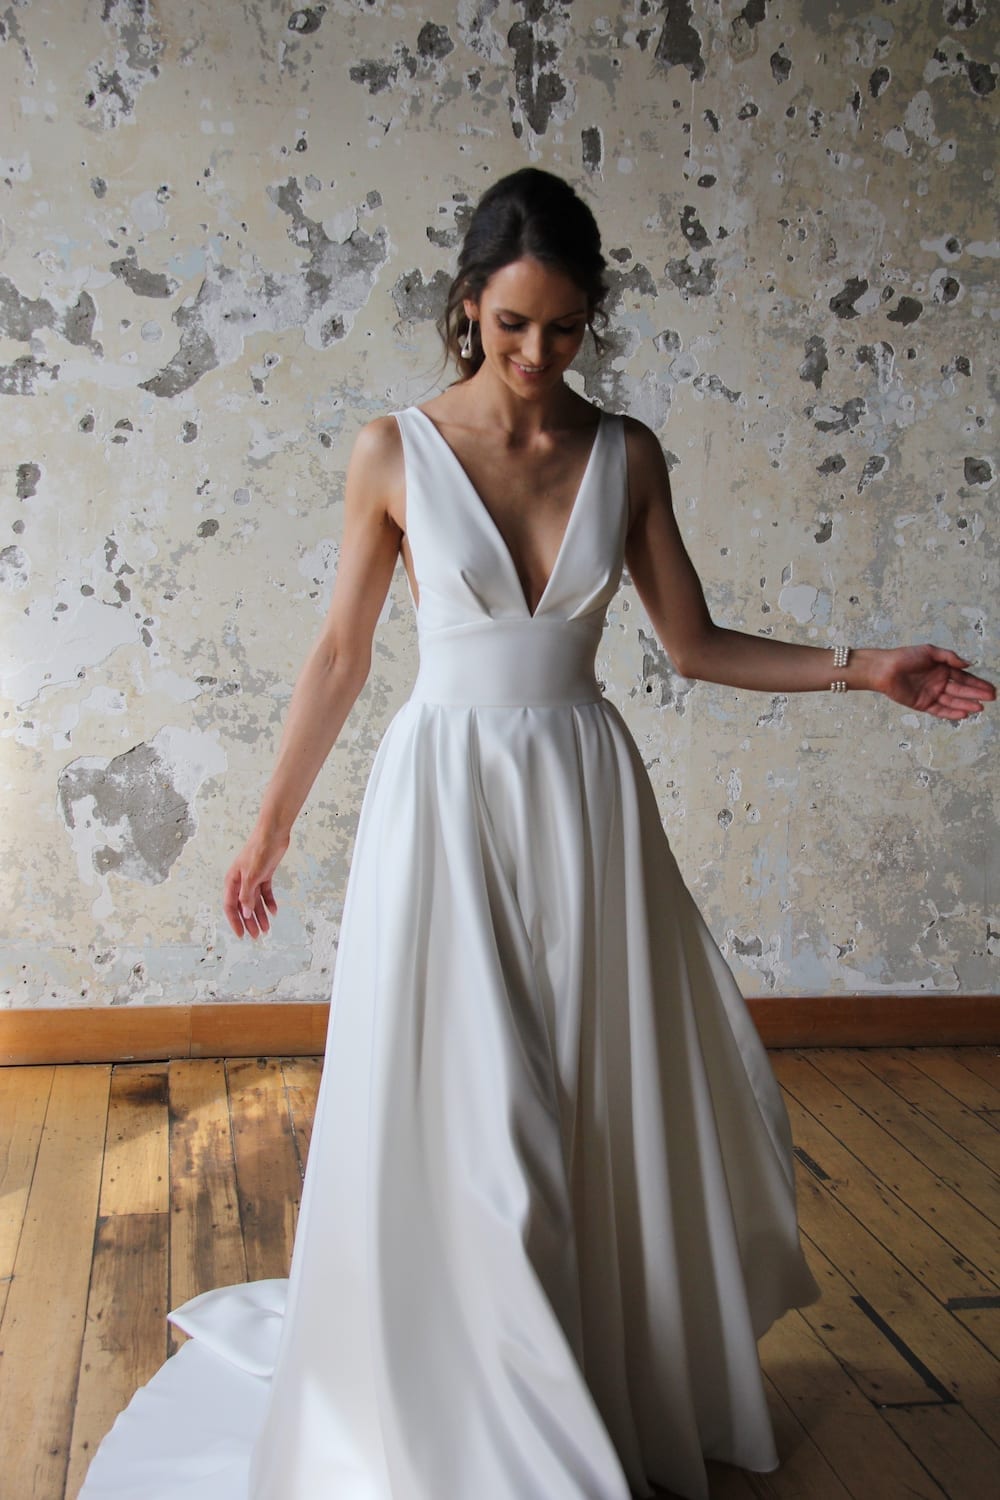 Female model wearing Vinka Design Modern Muse Wedding Dress. In chic warehouse the front detail of a gown with plunging v-neckline, Clean, sharp lines and skirt with deep pleated folds and pockets.